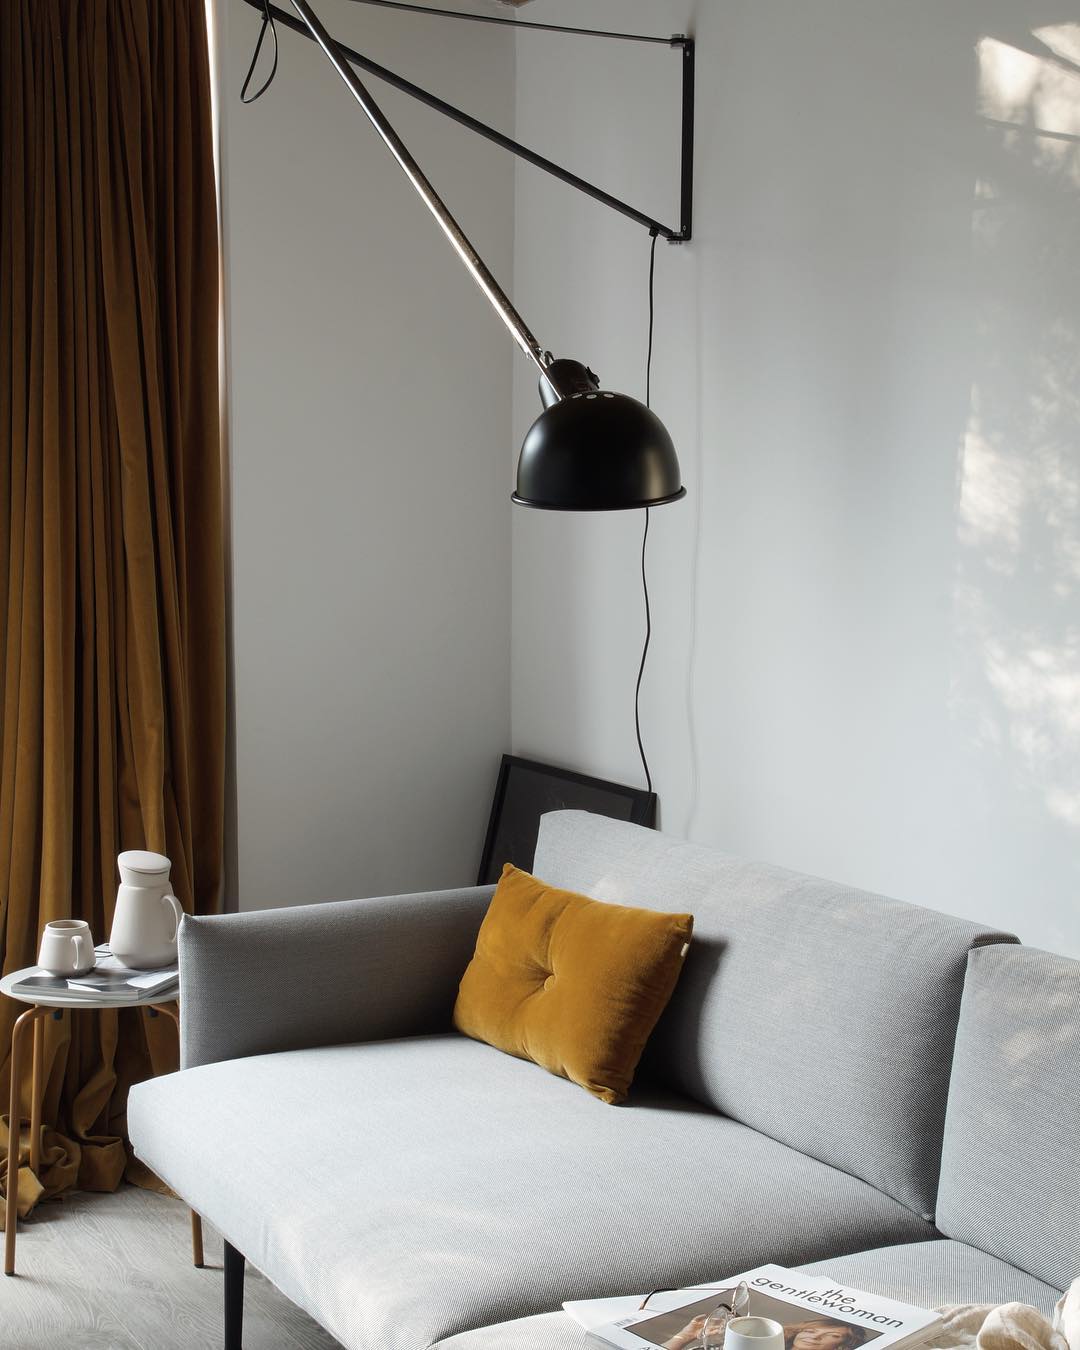 Nordic, minimalist home updates for the spring including mustard yellow curtains and spring blossom